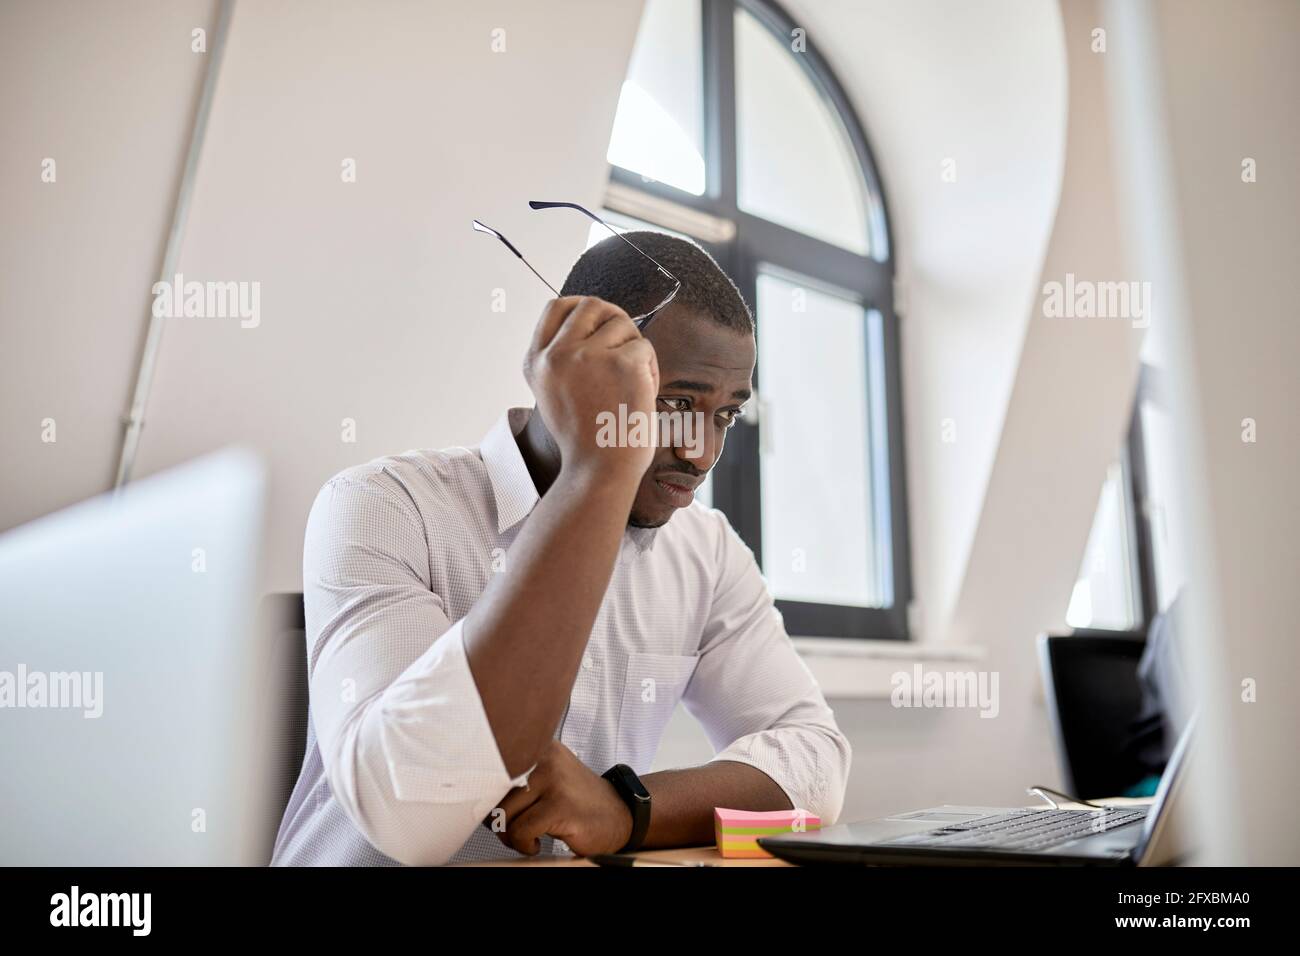 Worried male professional holding eyeglasses while looking at laptop in office Stock Photo